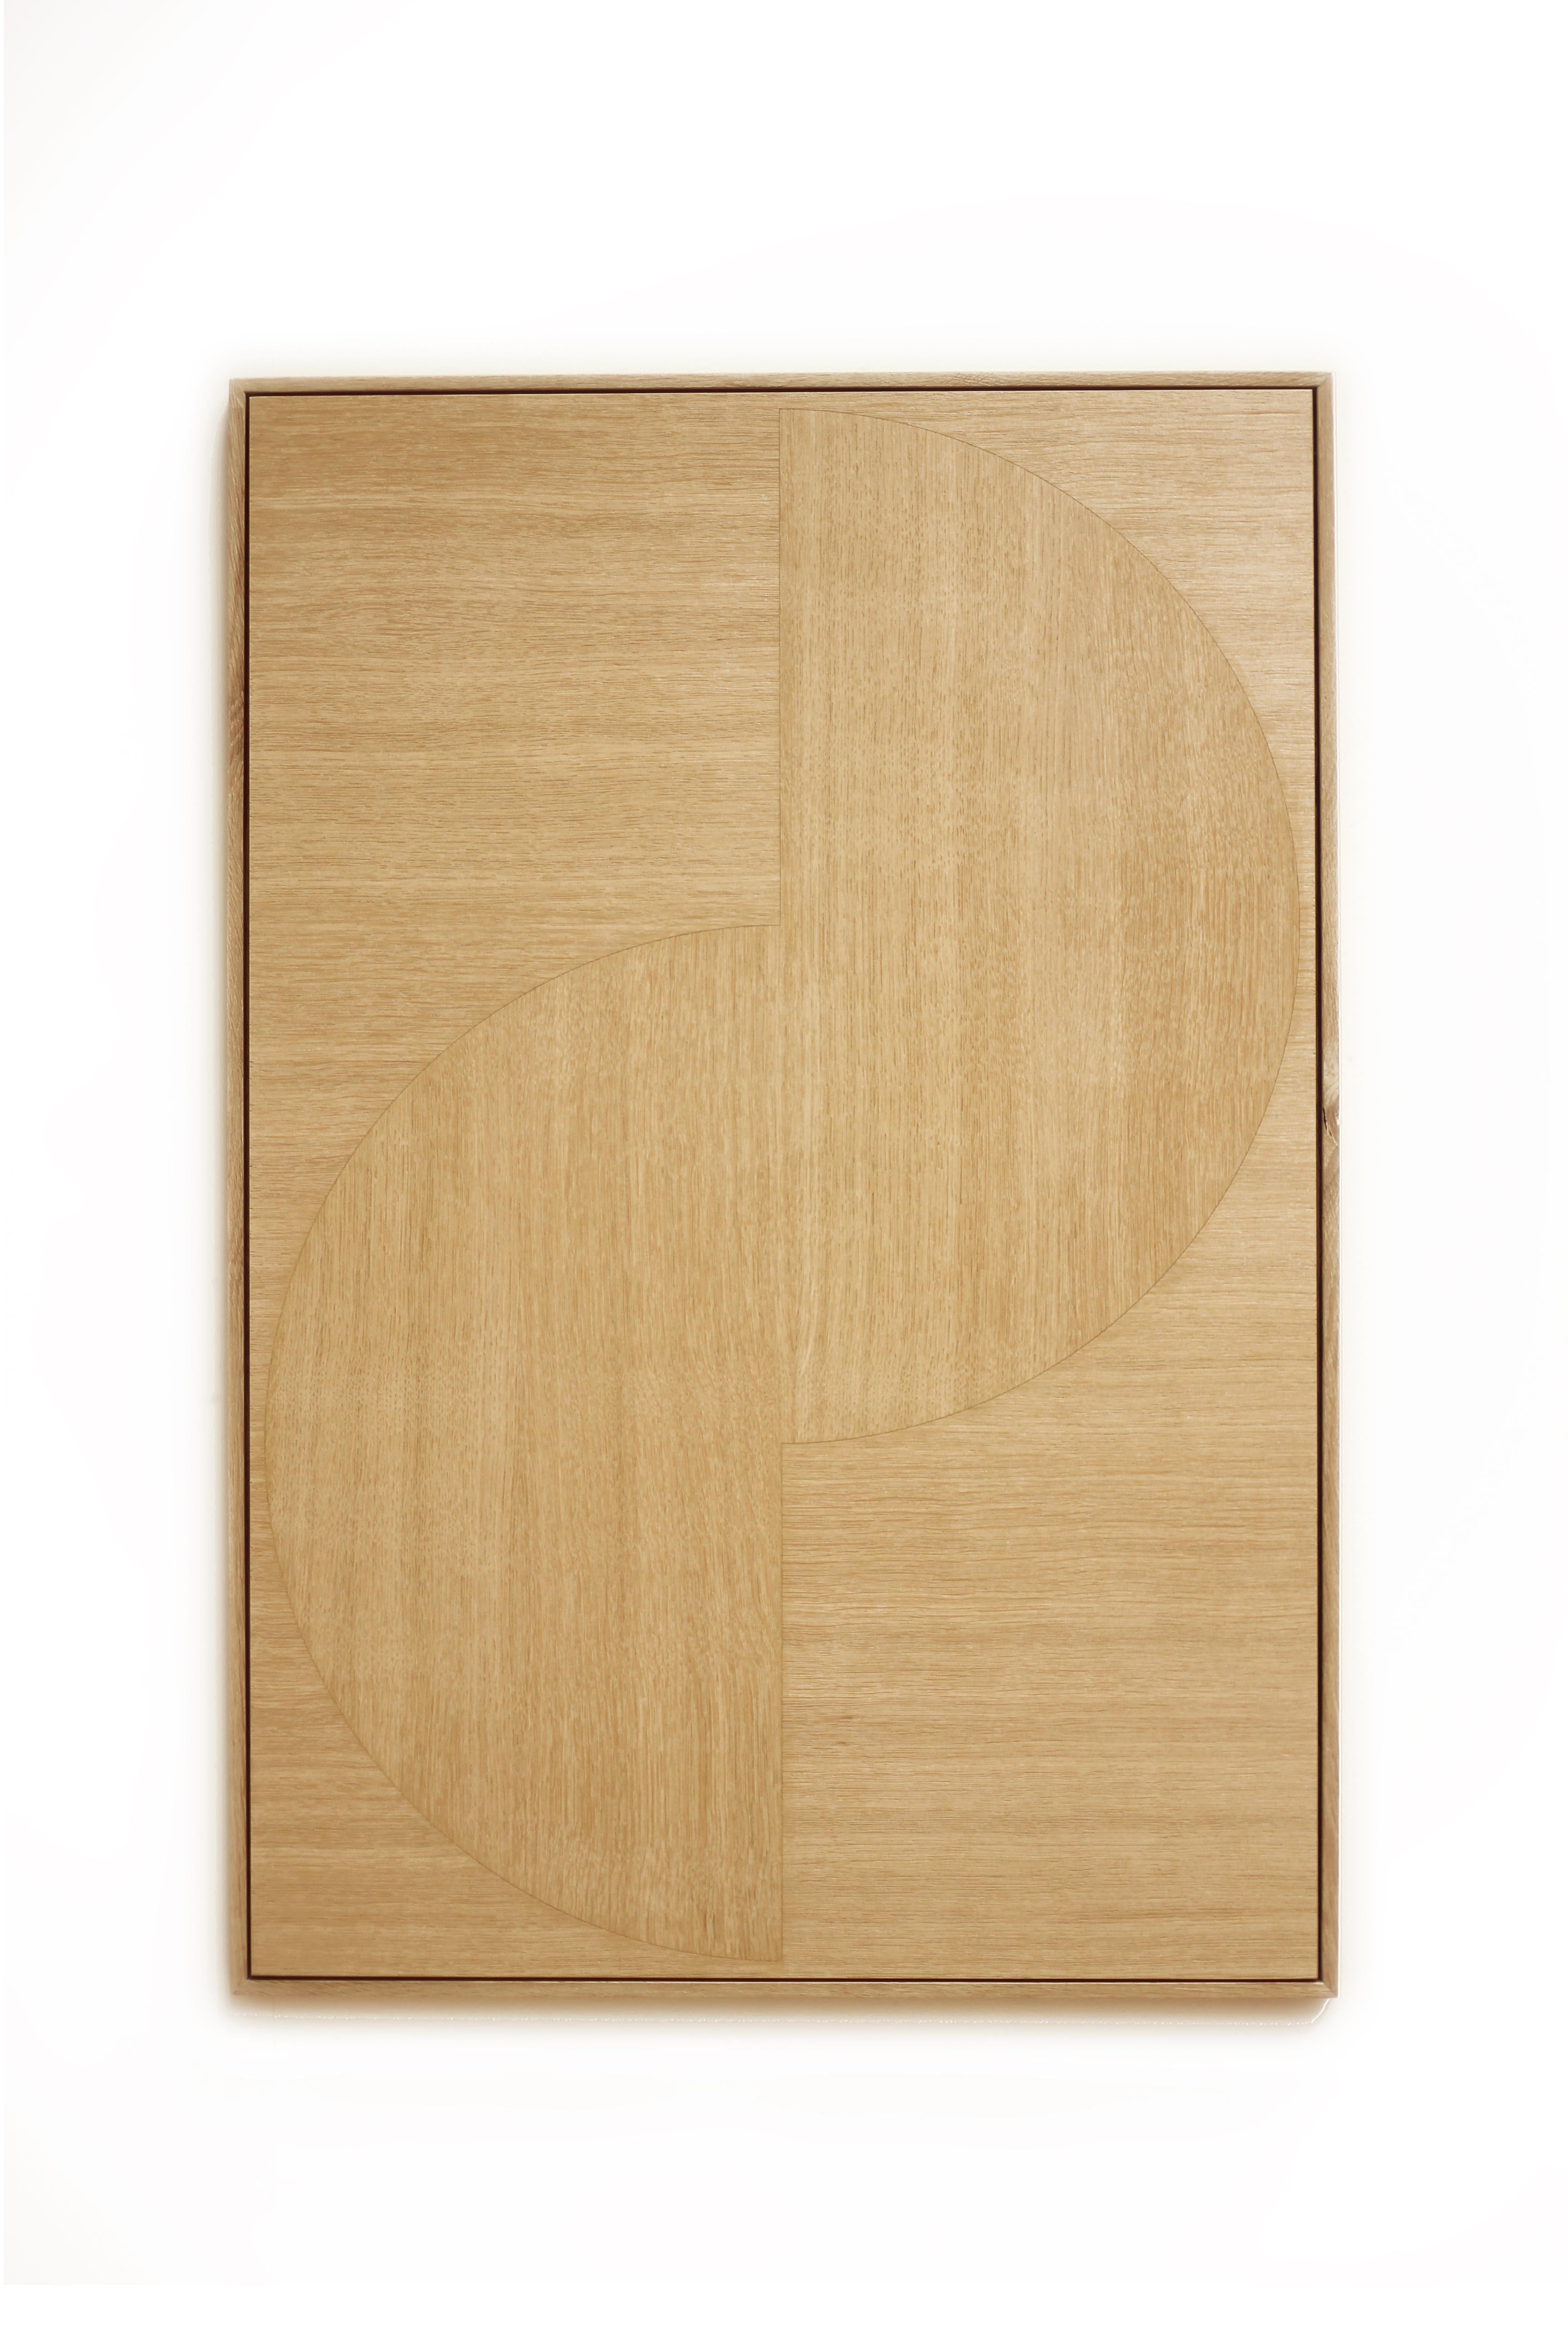 MM6 Minimal Marquetry Wall Decoration by Studio Verbaan
Dimensions: W80 x H100 cm.
Materials: Wood
Also available in different dimensions. Please contact us.

The Minimal Marquetry collection, like other pieces from Studio Verbaan, offers a